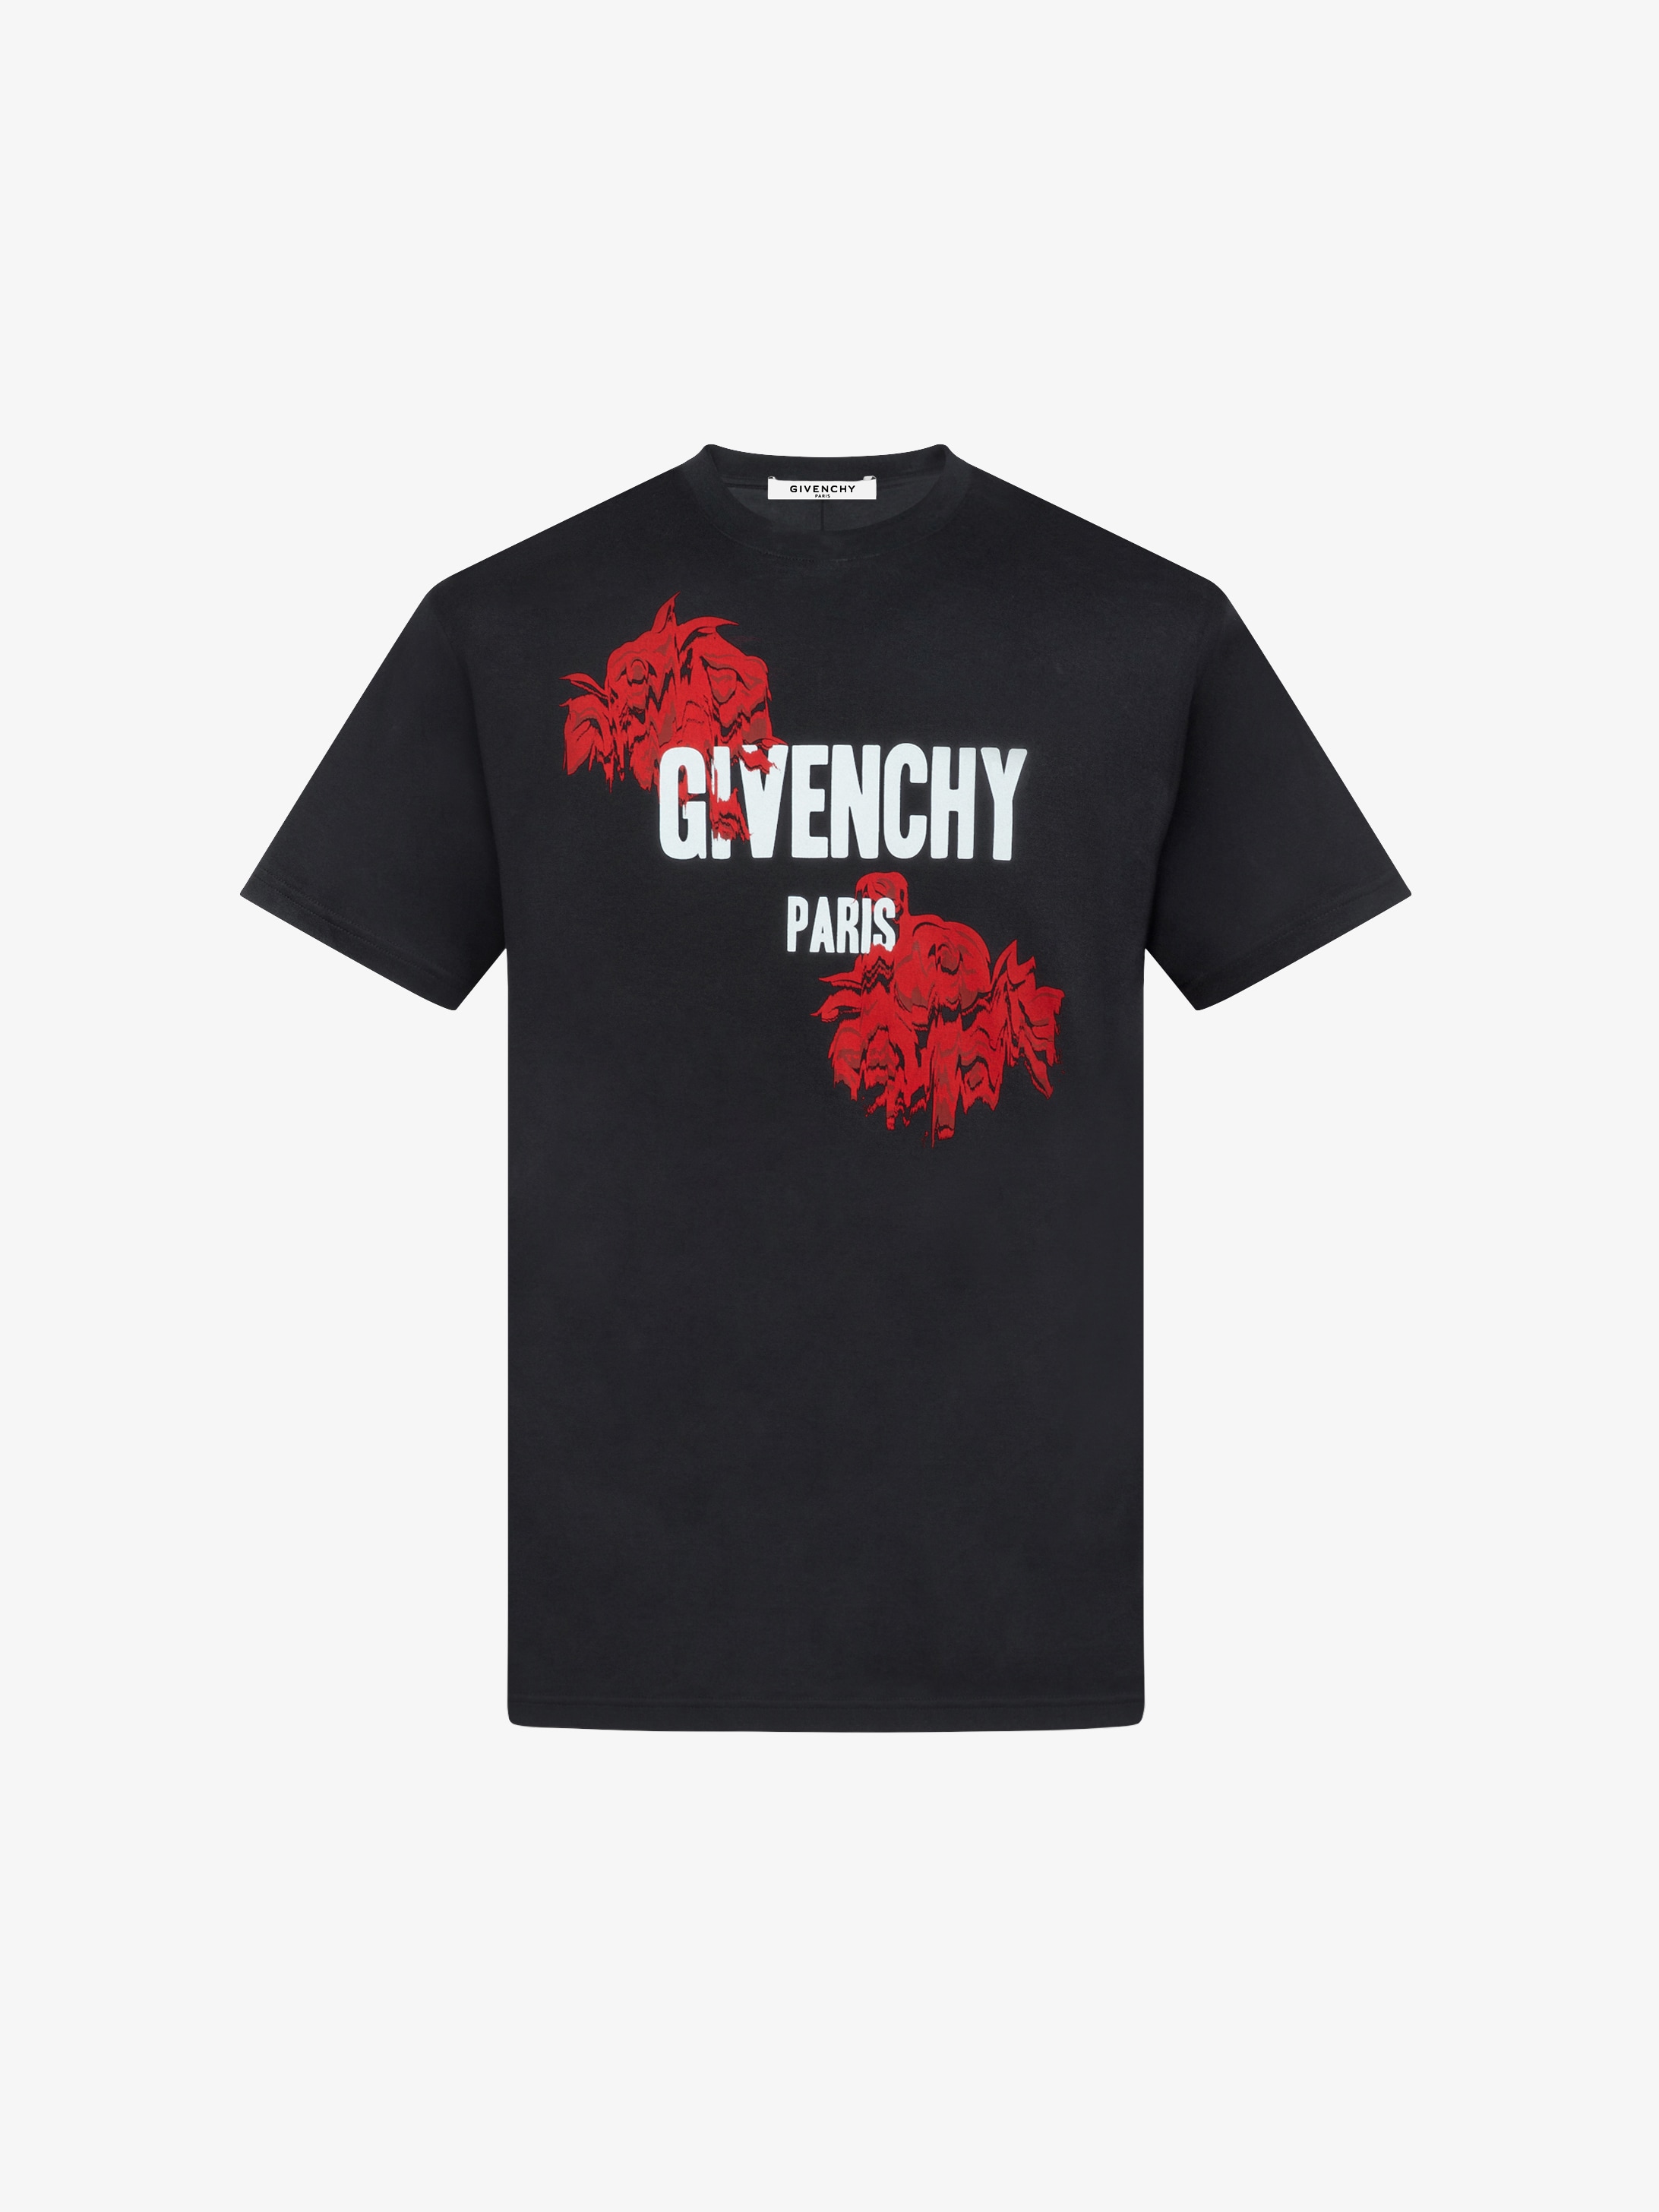 white and red givenchy shirt